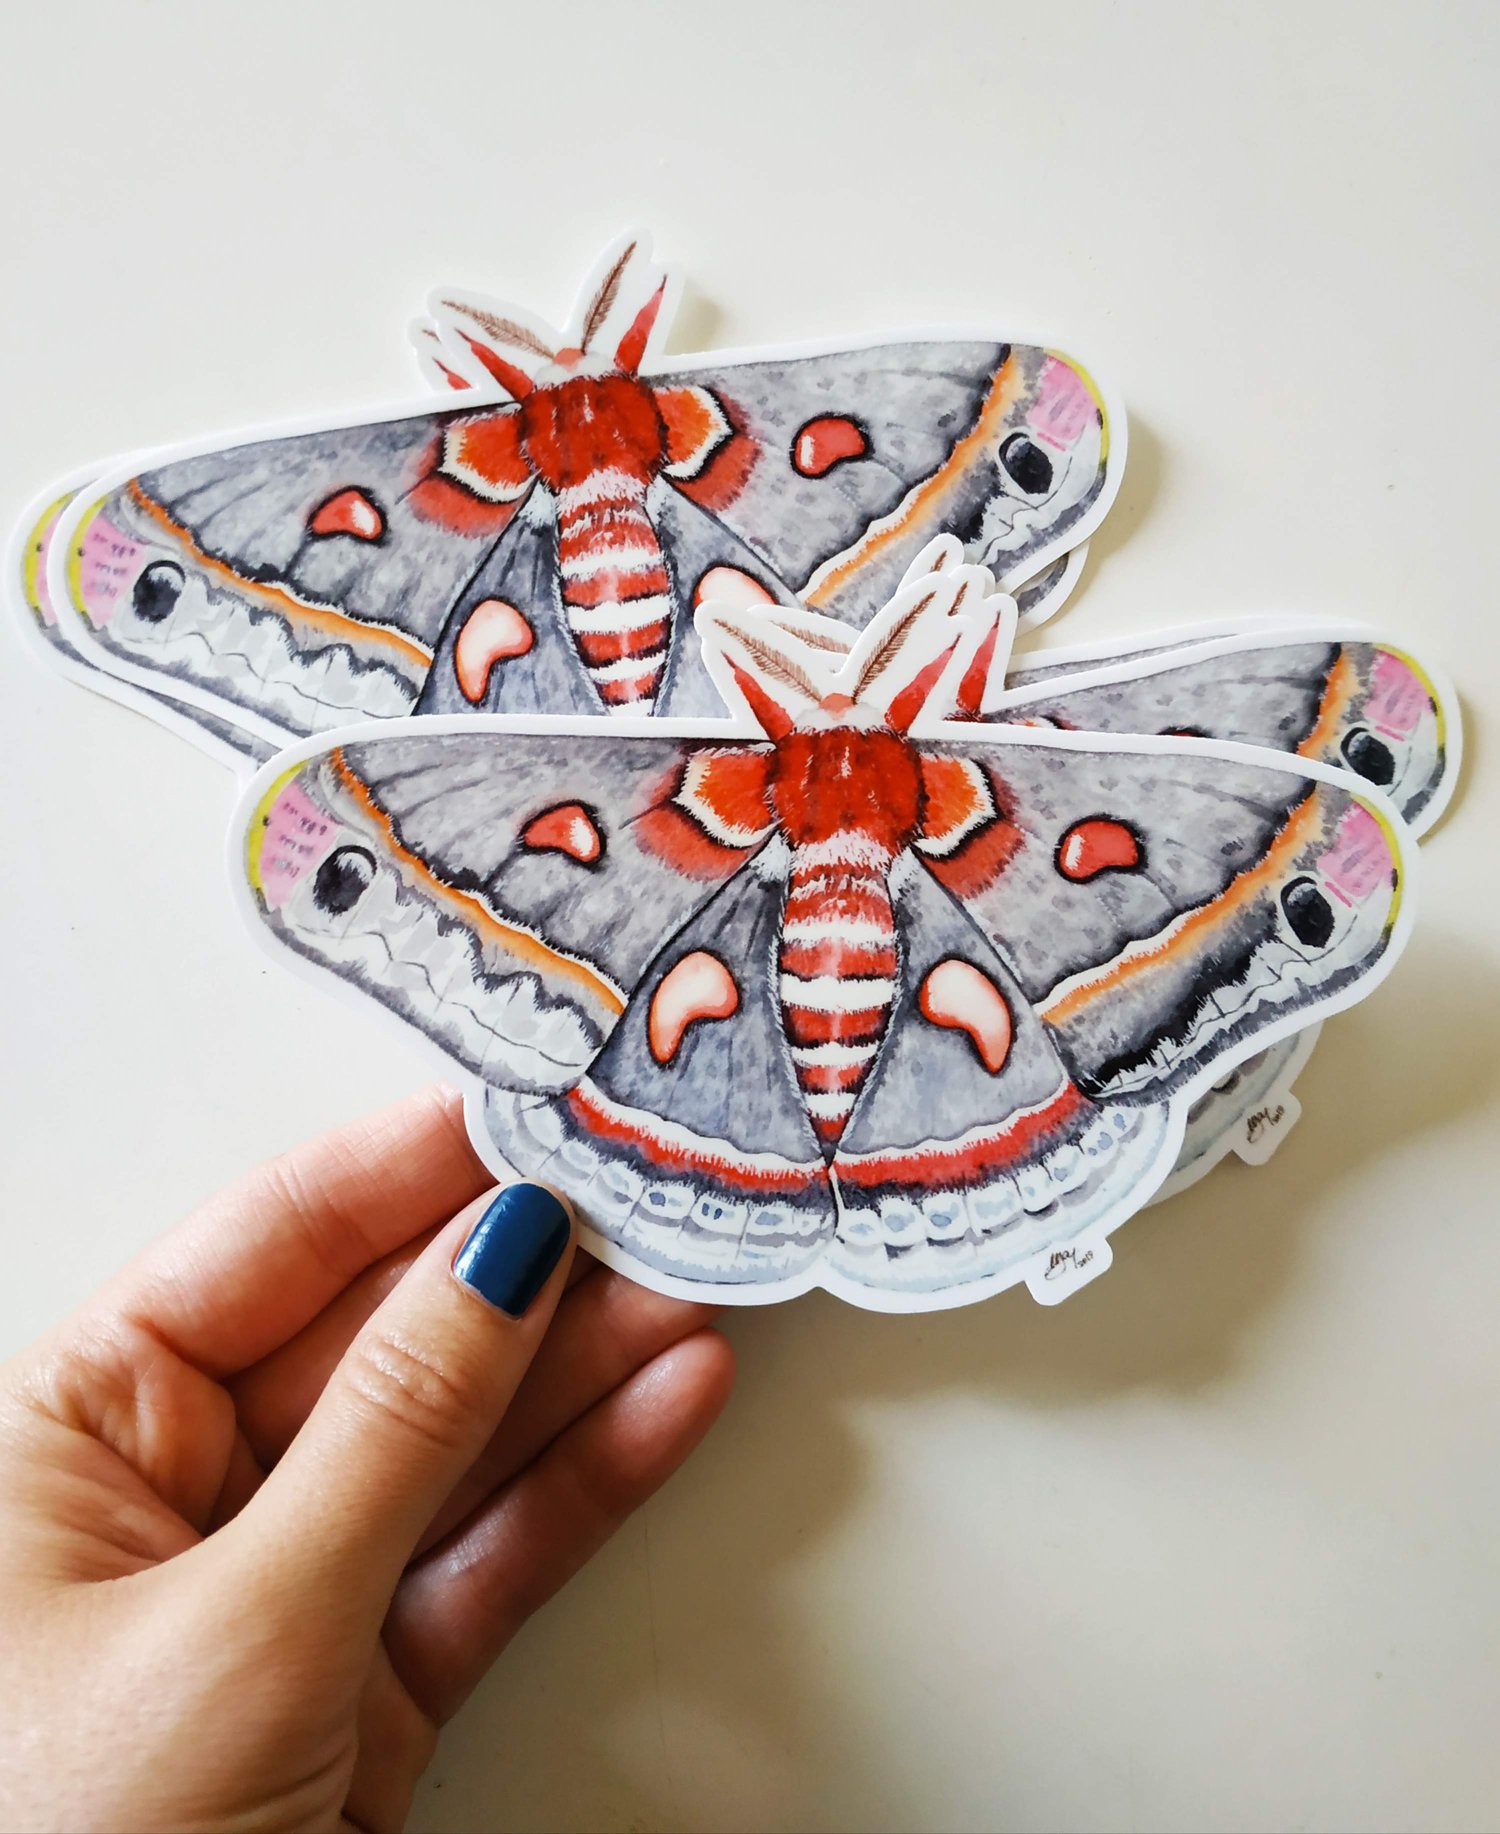 Image of Cecropia Moth XL Bumper sticker, Waterproof and Scratch resistant.